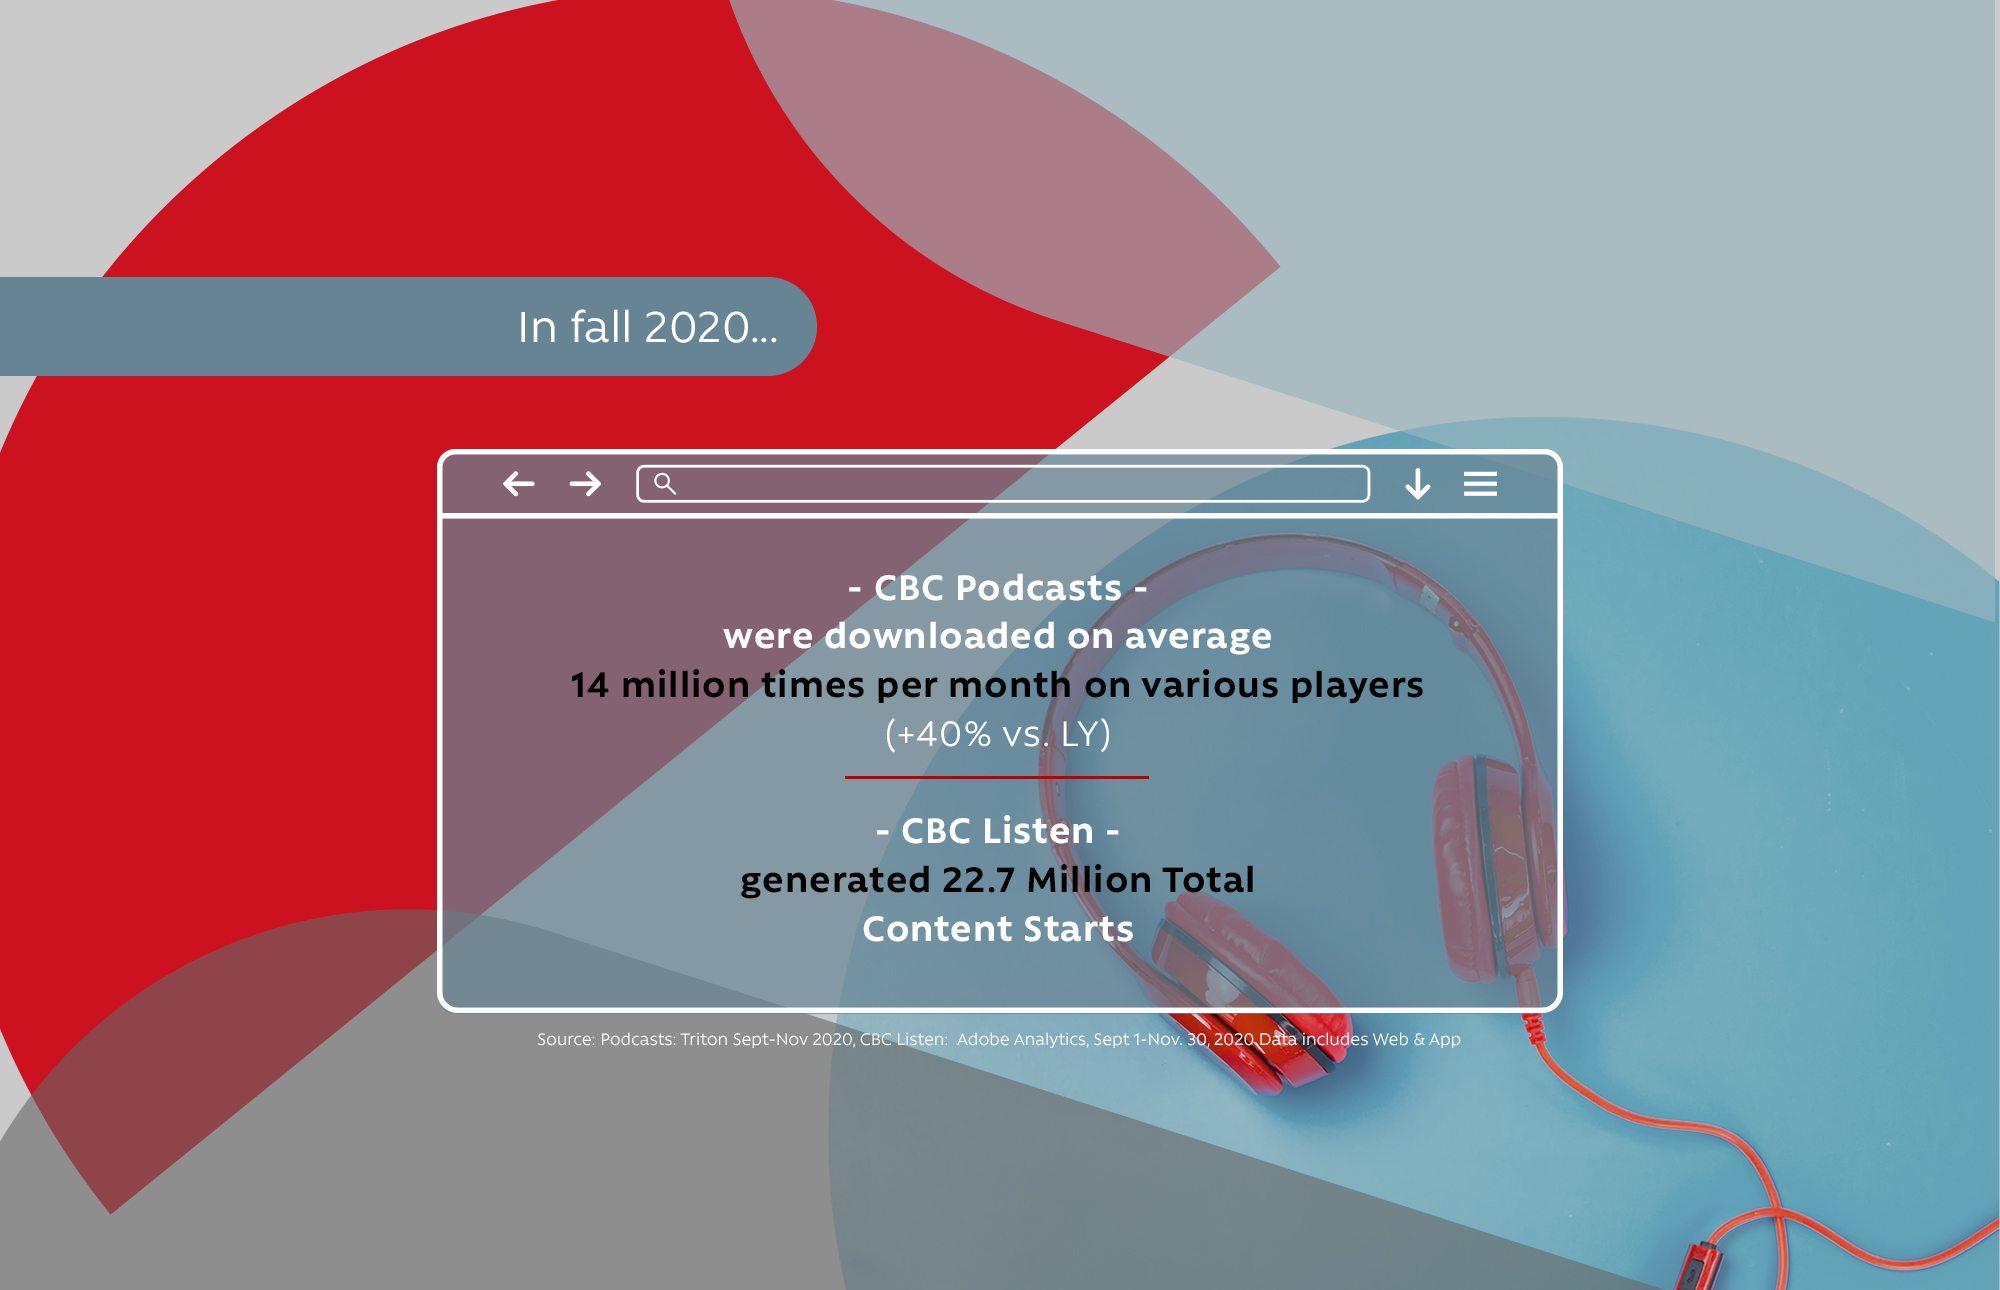 In fall 2020 - CBC Podcasts - were downloaded on average 14 million times per month on various players (+40% vs. LY) - CBC Listen - generated 22.7 Million Total Content Starts